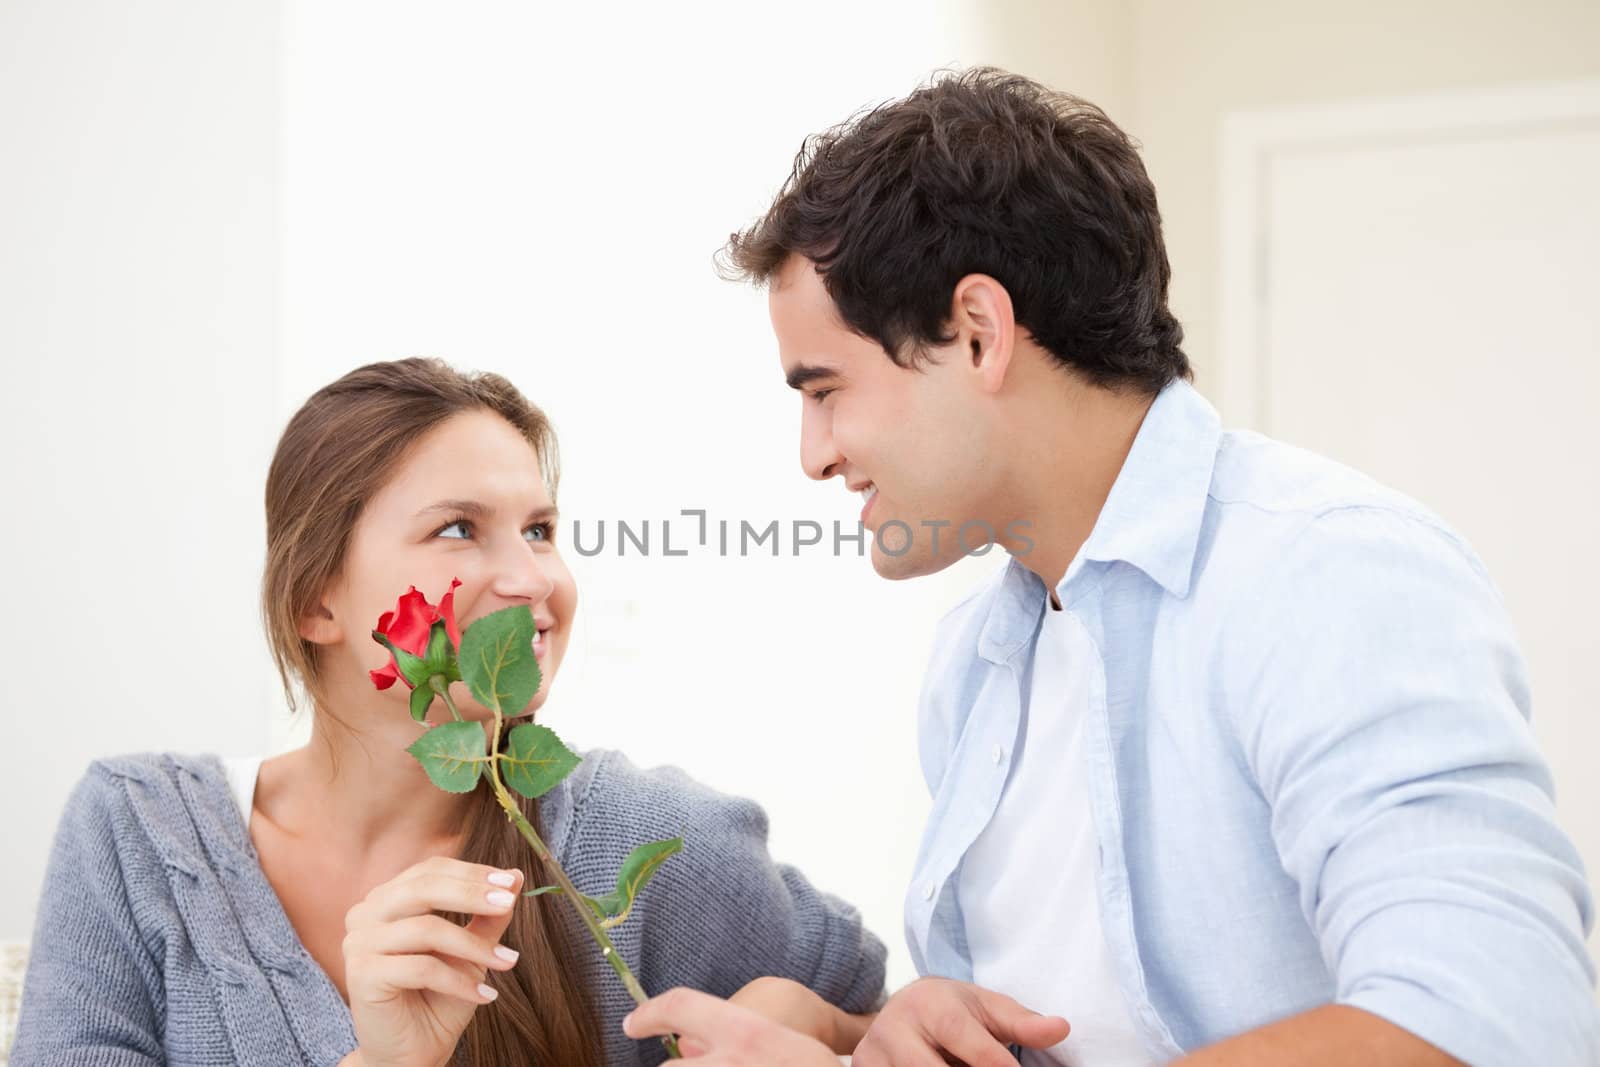 Man offering a rose to a Woman  by Wavebreakmedia